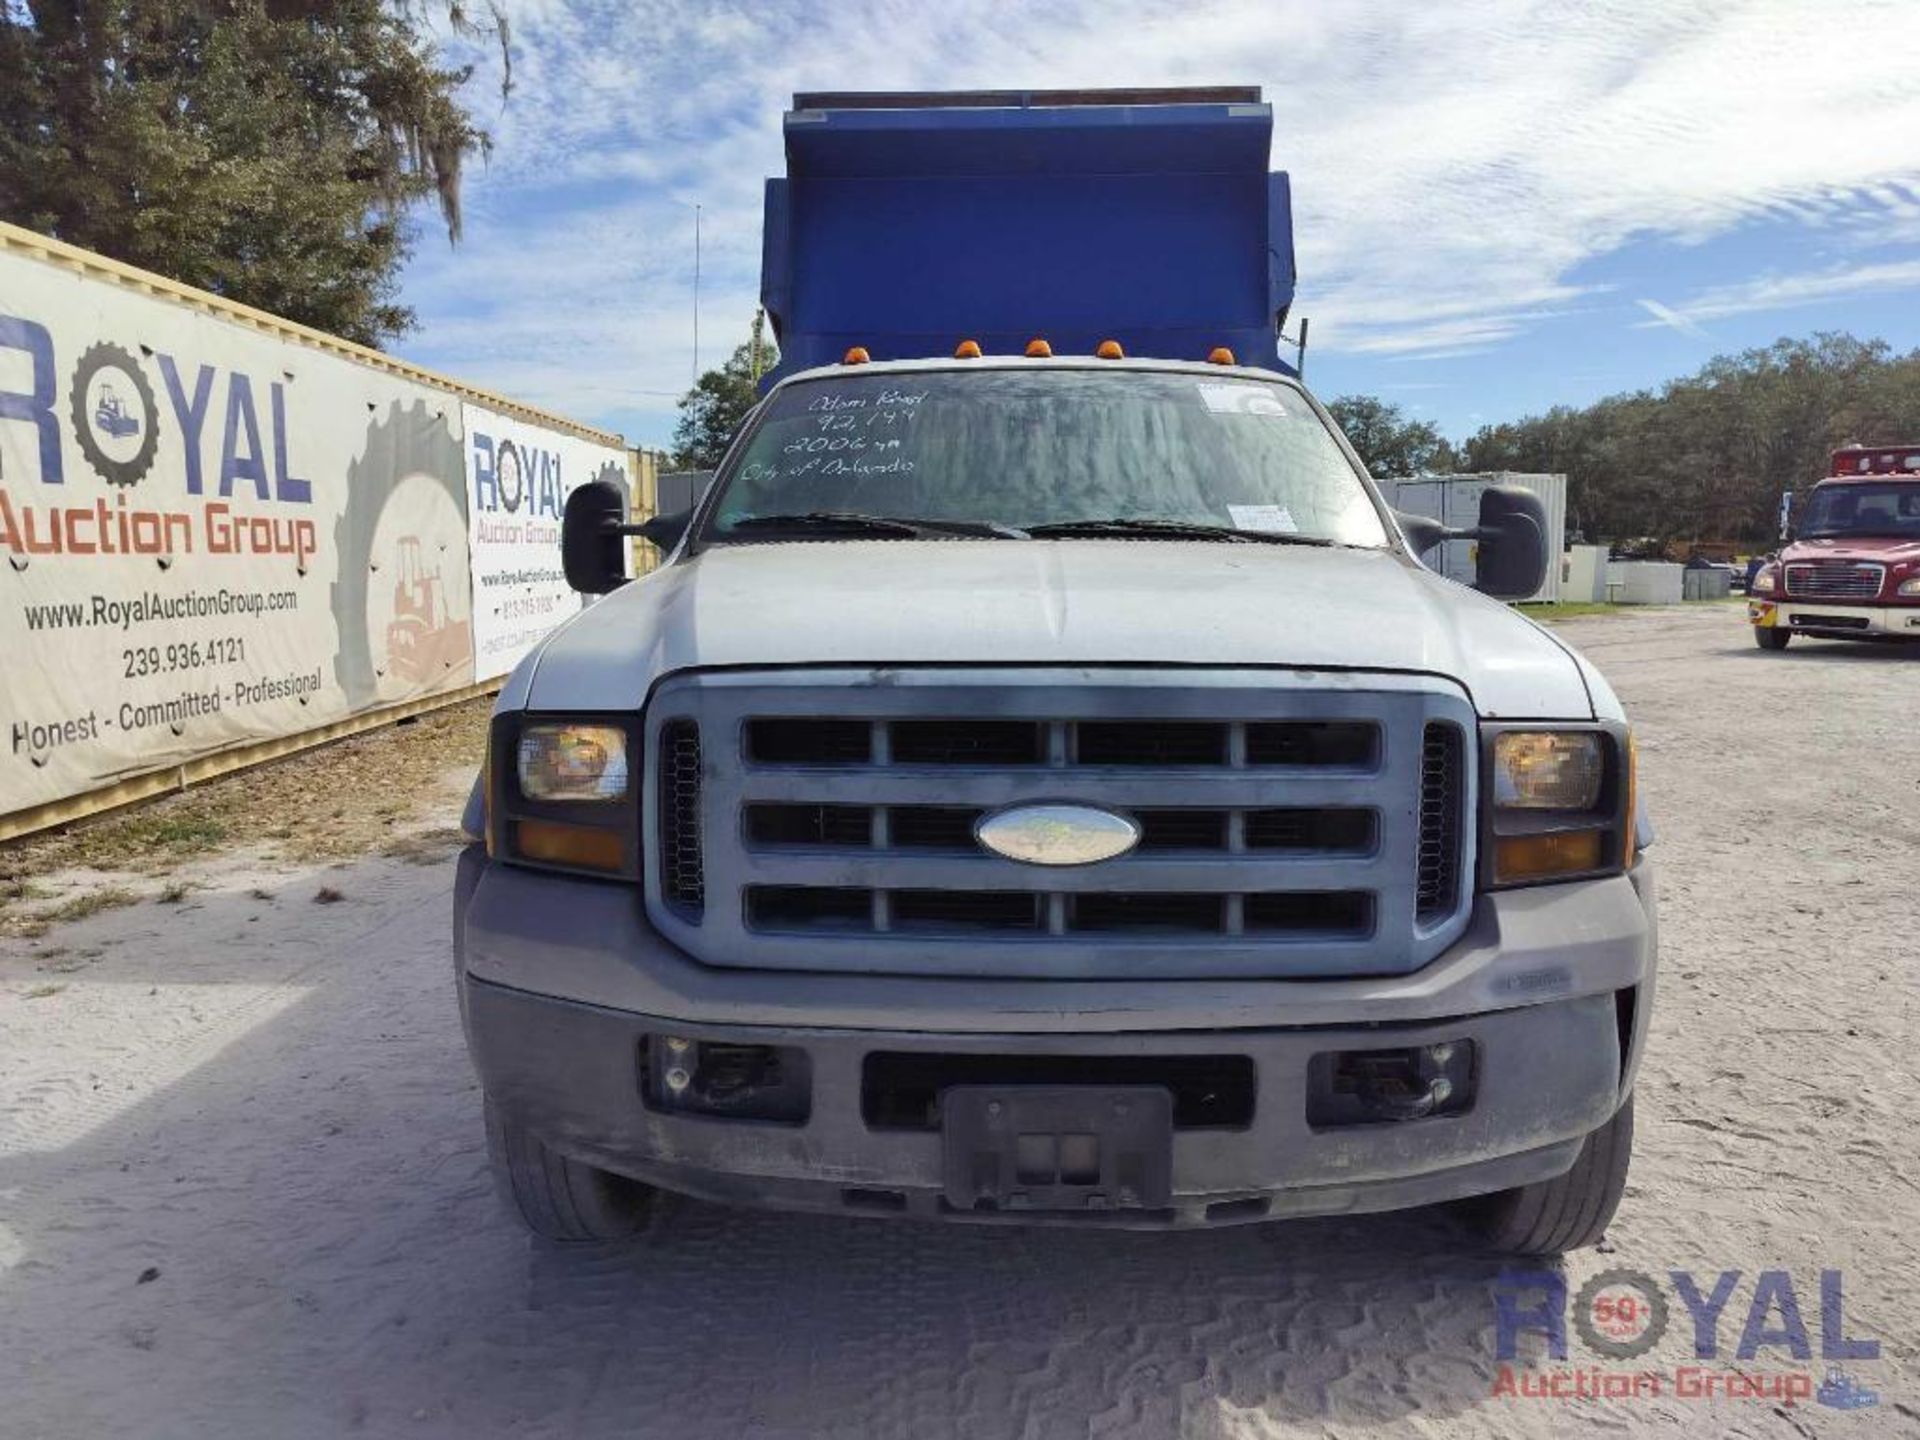 2006 Ford F350 Dump Truck - Image 9 of 27